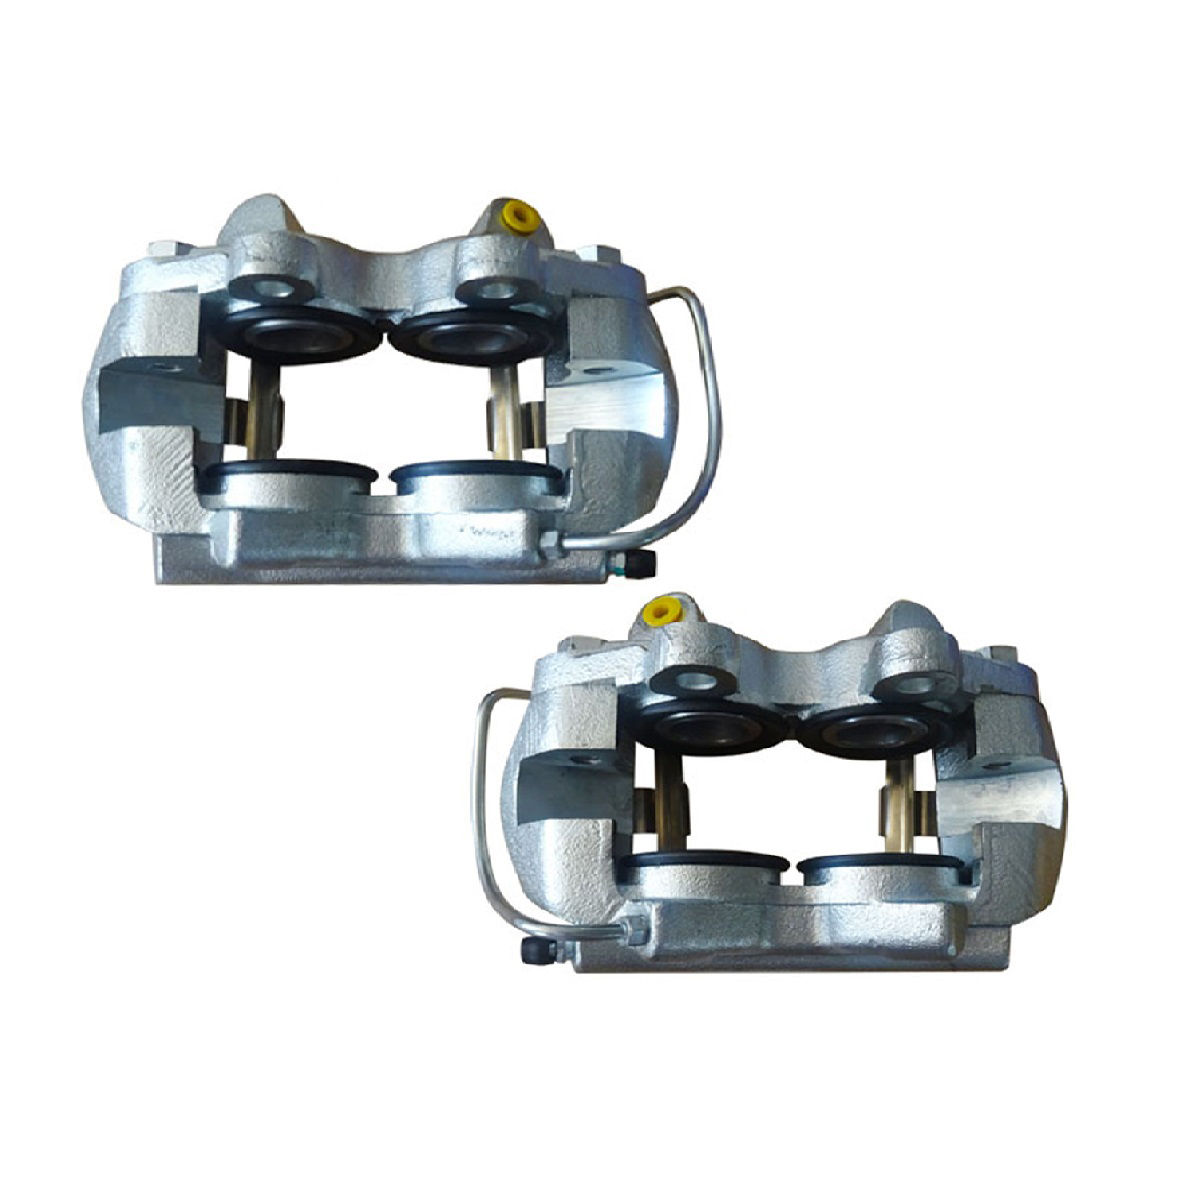 MAYASAF NEW Pair: 184400 184401 Front Left Right Disc Brake Calipers for 1965-66 Ford Mustang